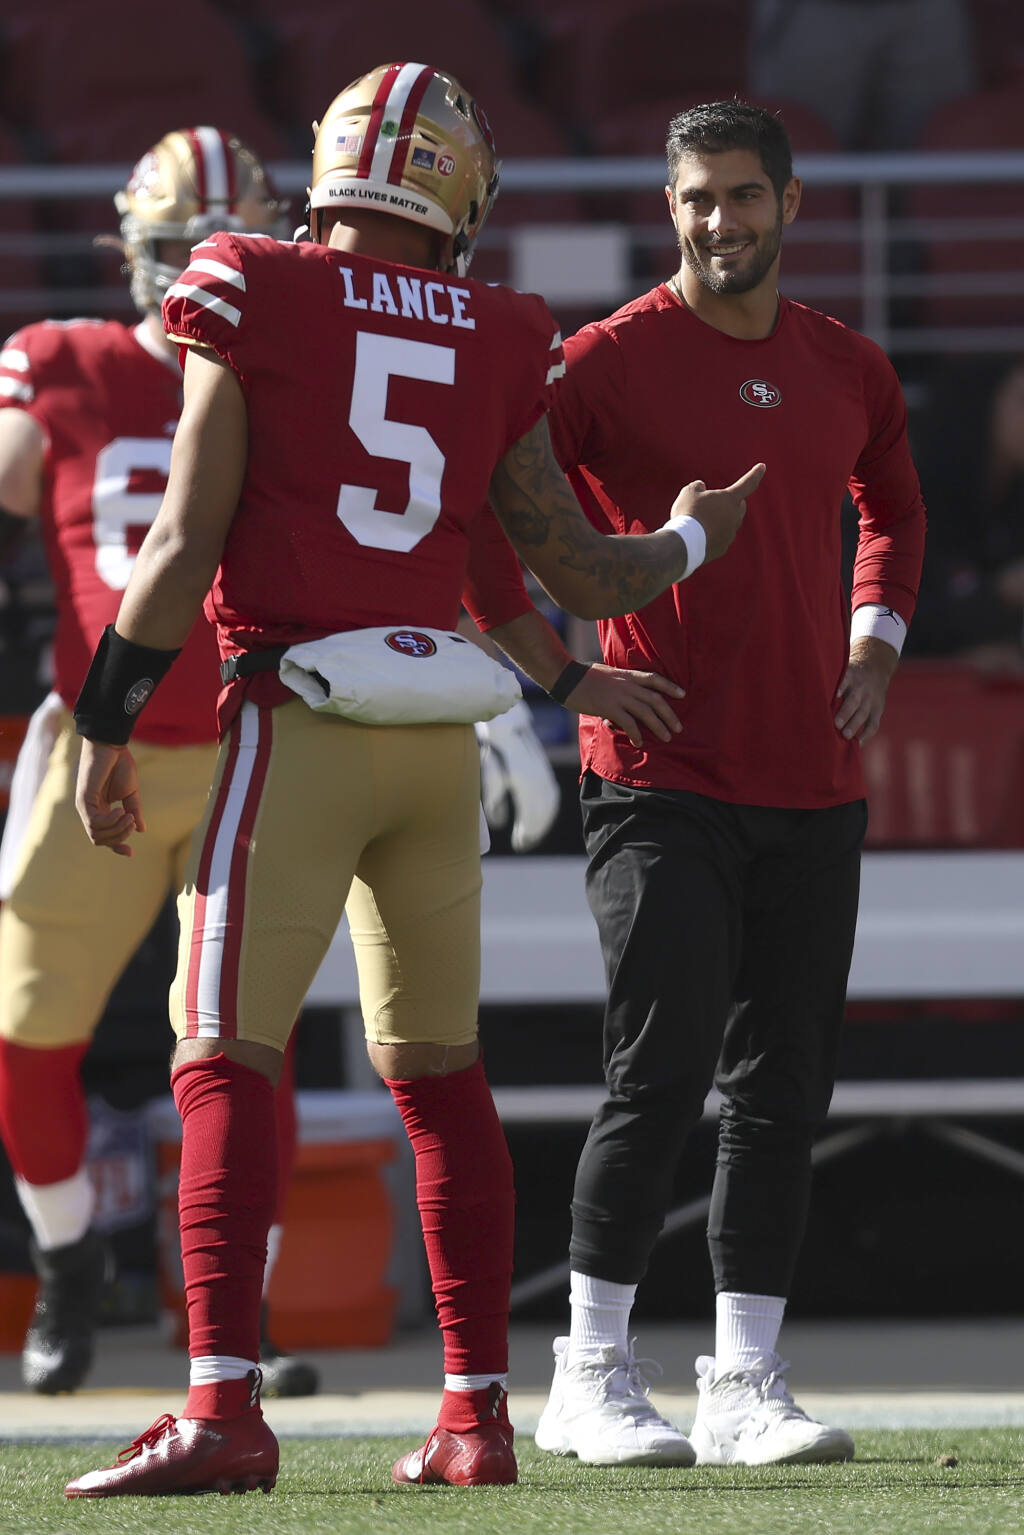 Nevius: Releasing Jimmy Garoppolo the right thing for 49ers to do